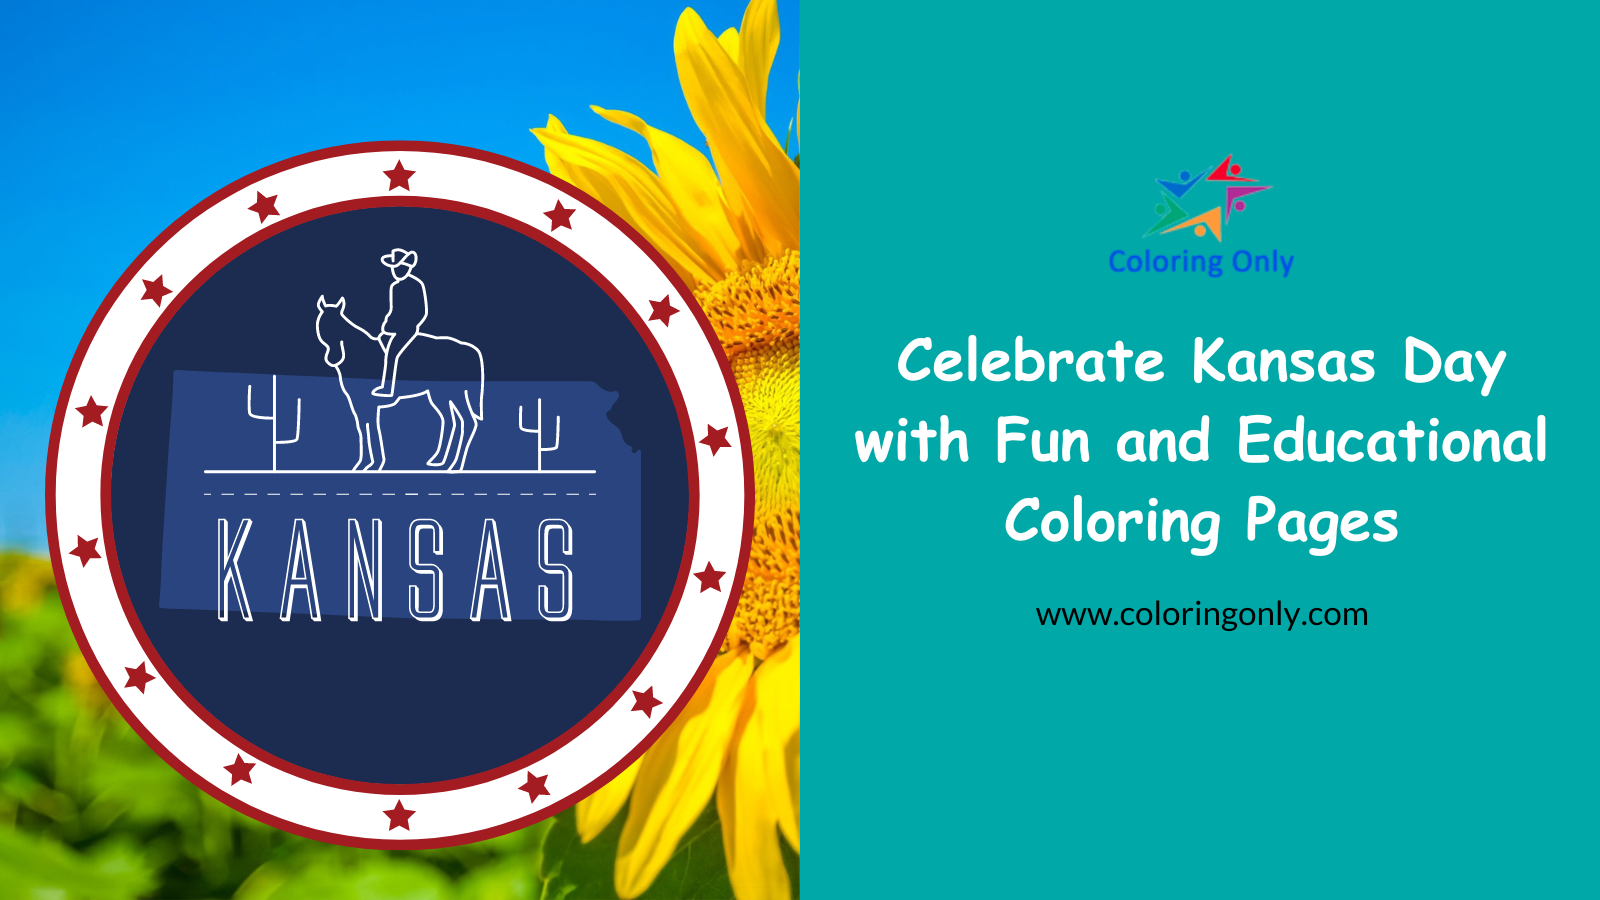 Celebrate Kansas Day with Fun and Educational Coloring Pages